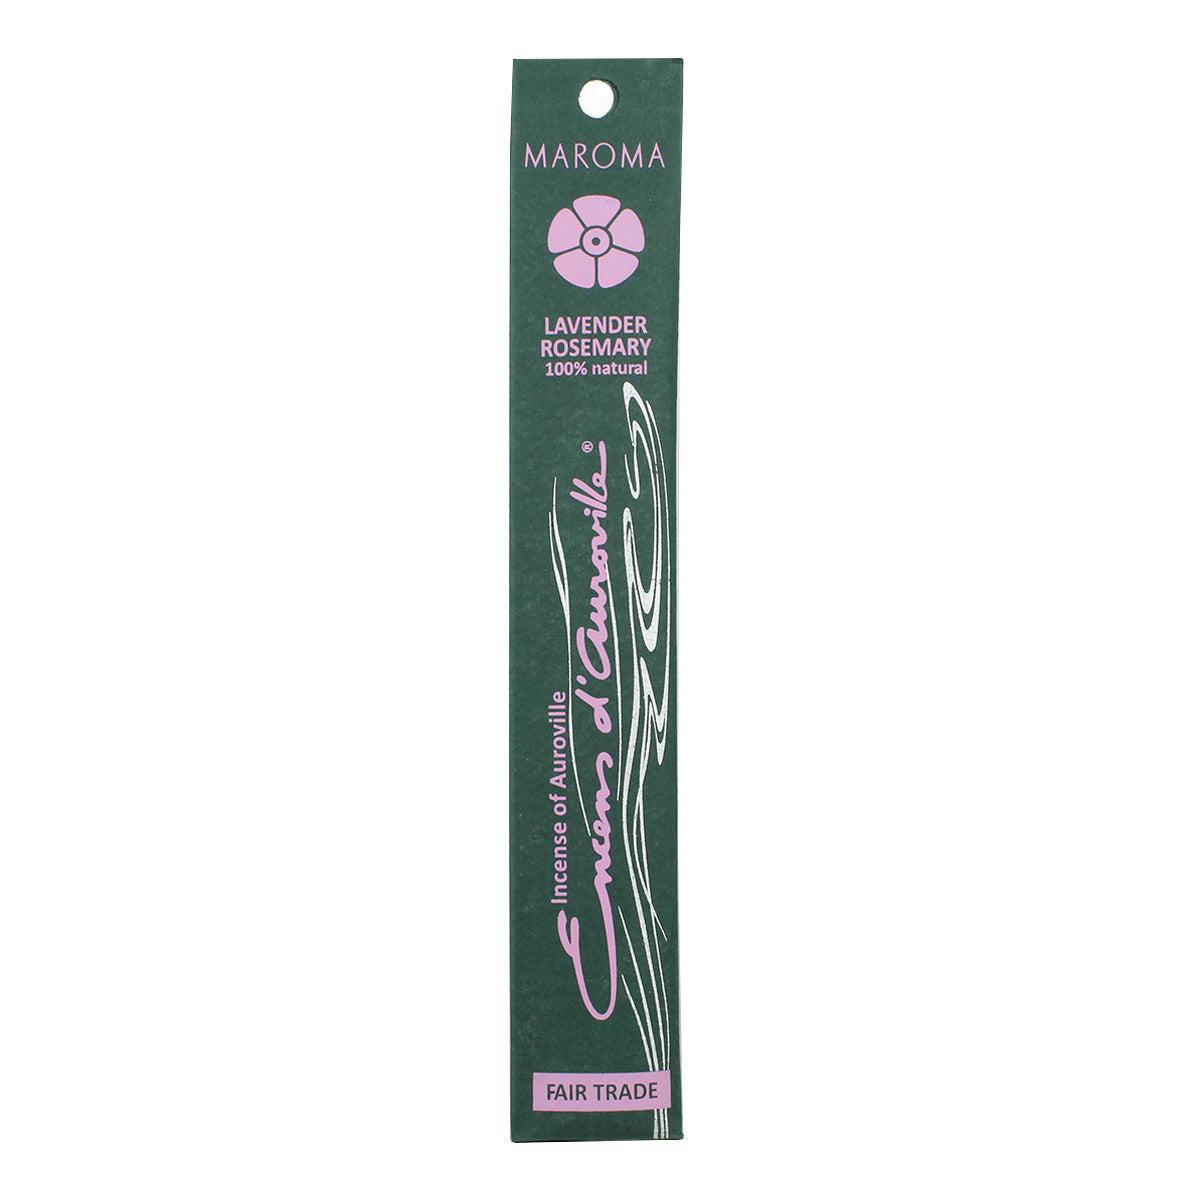 Primary image of EDA Lavender Rosemary Incense